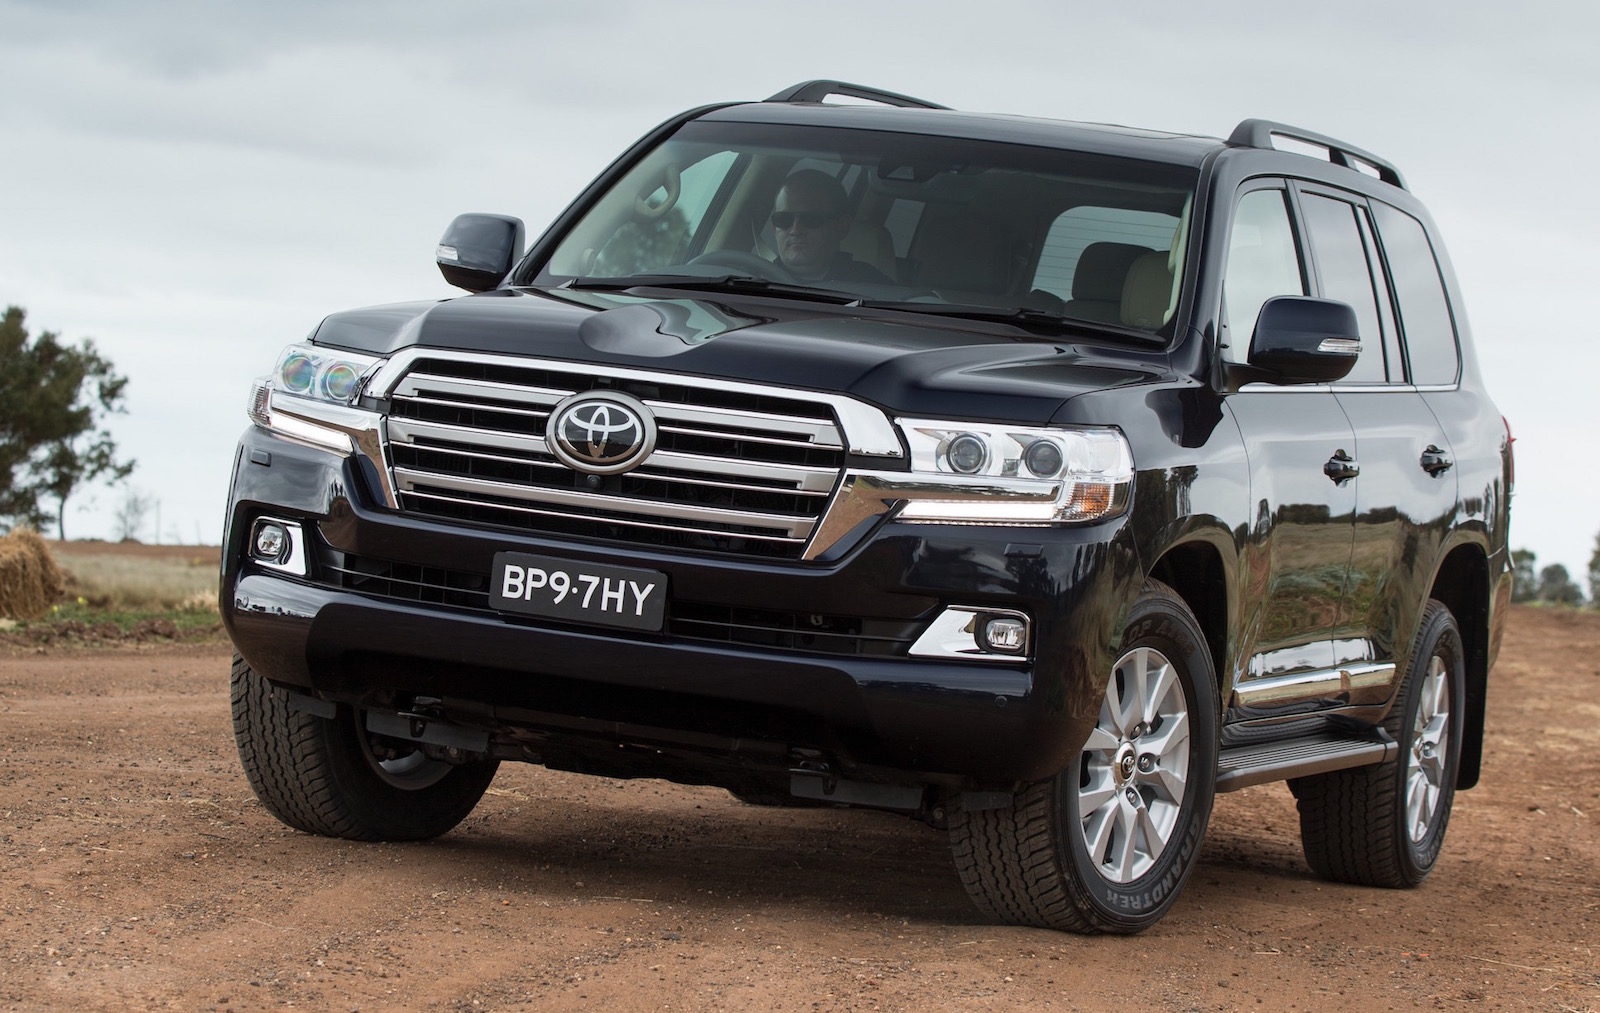 300 Series Toyota LandCruiser to debut in April 2021 – report